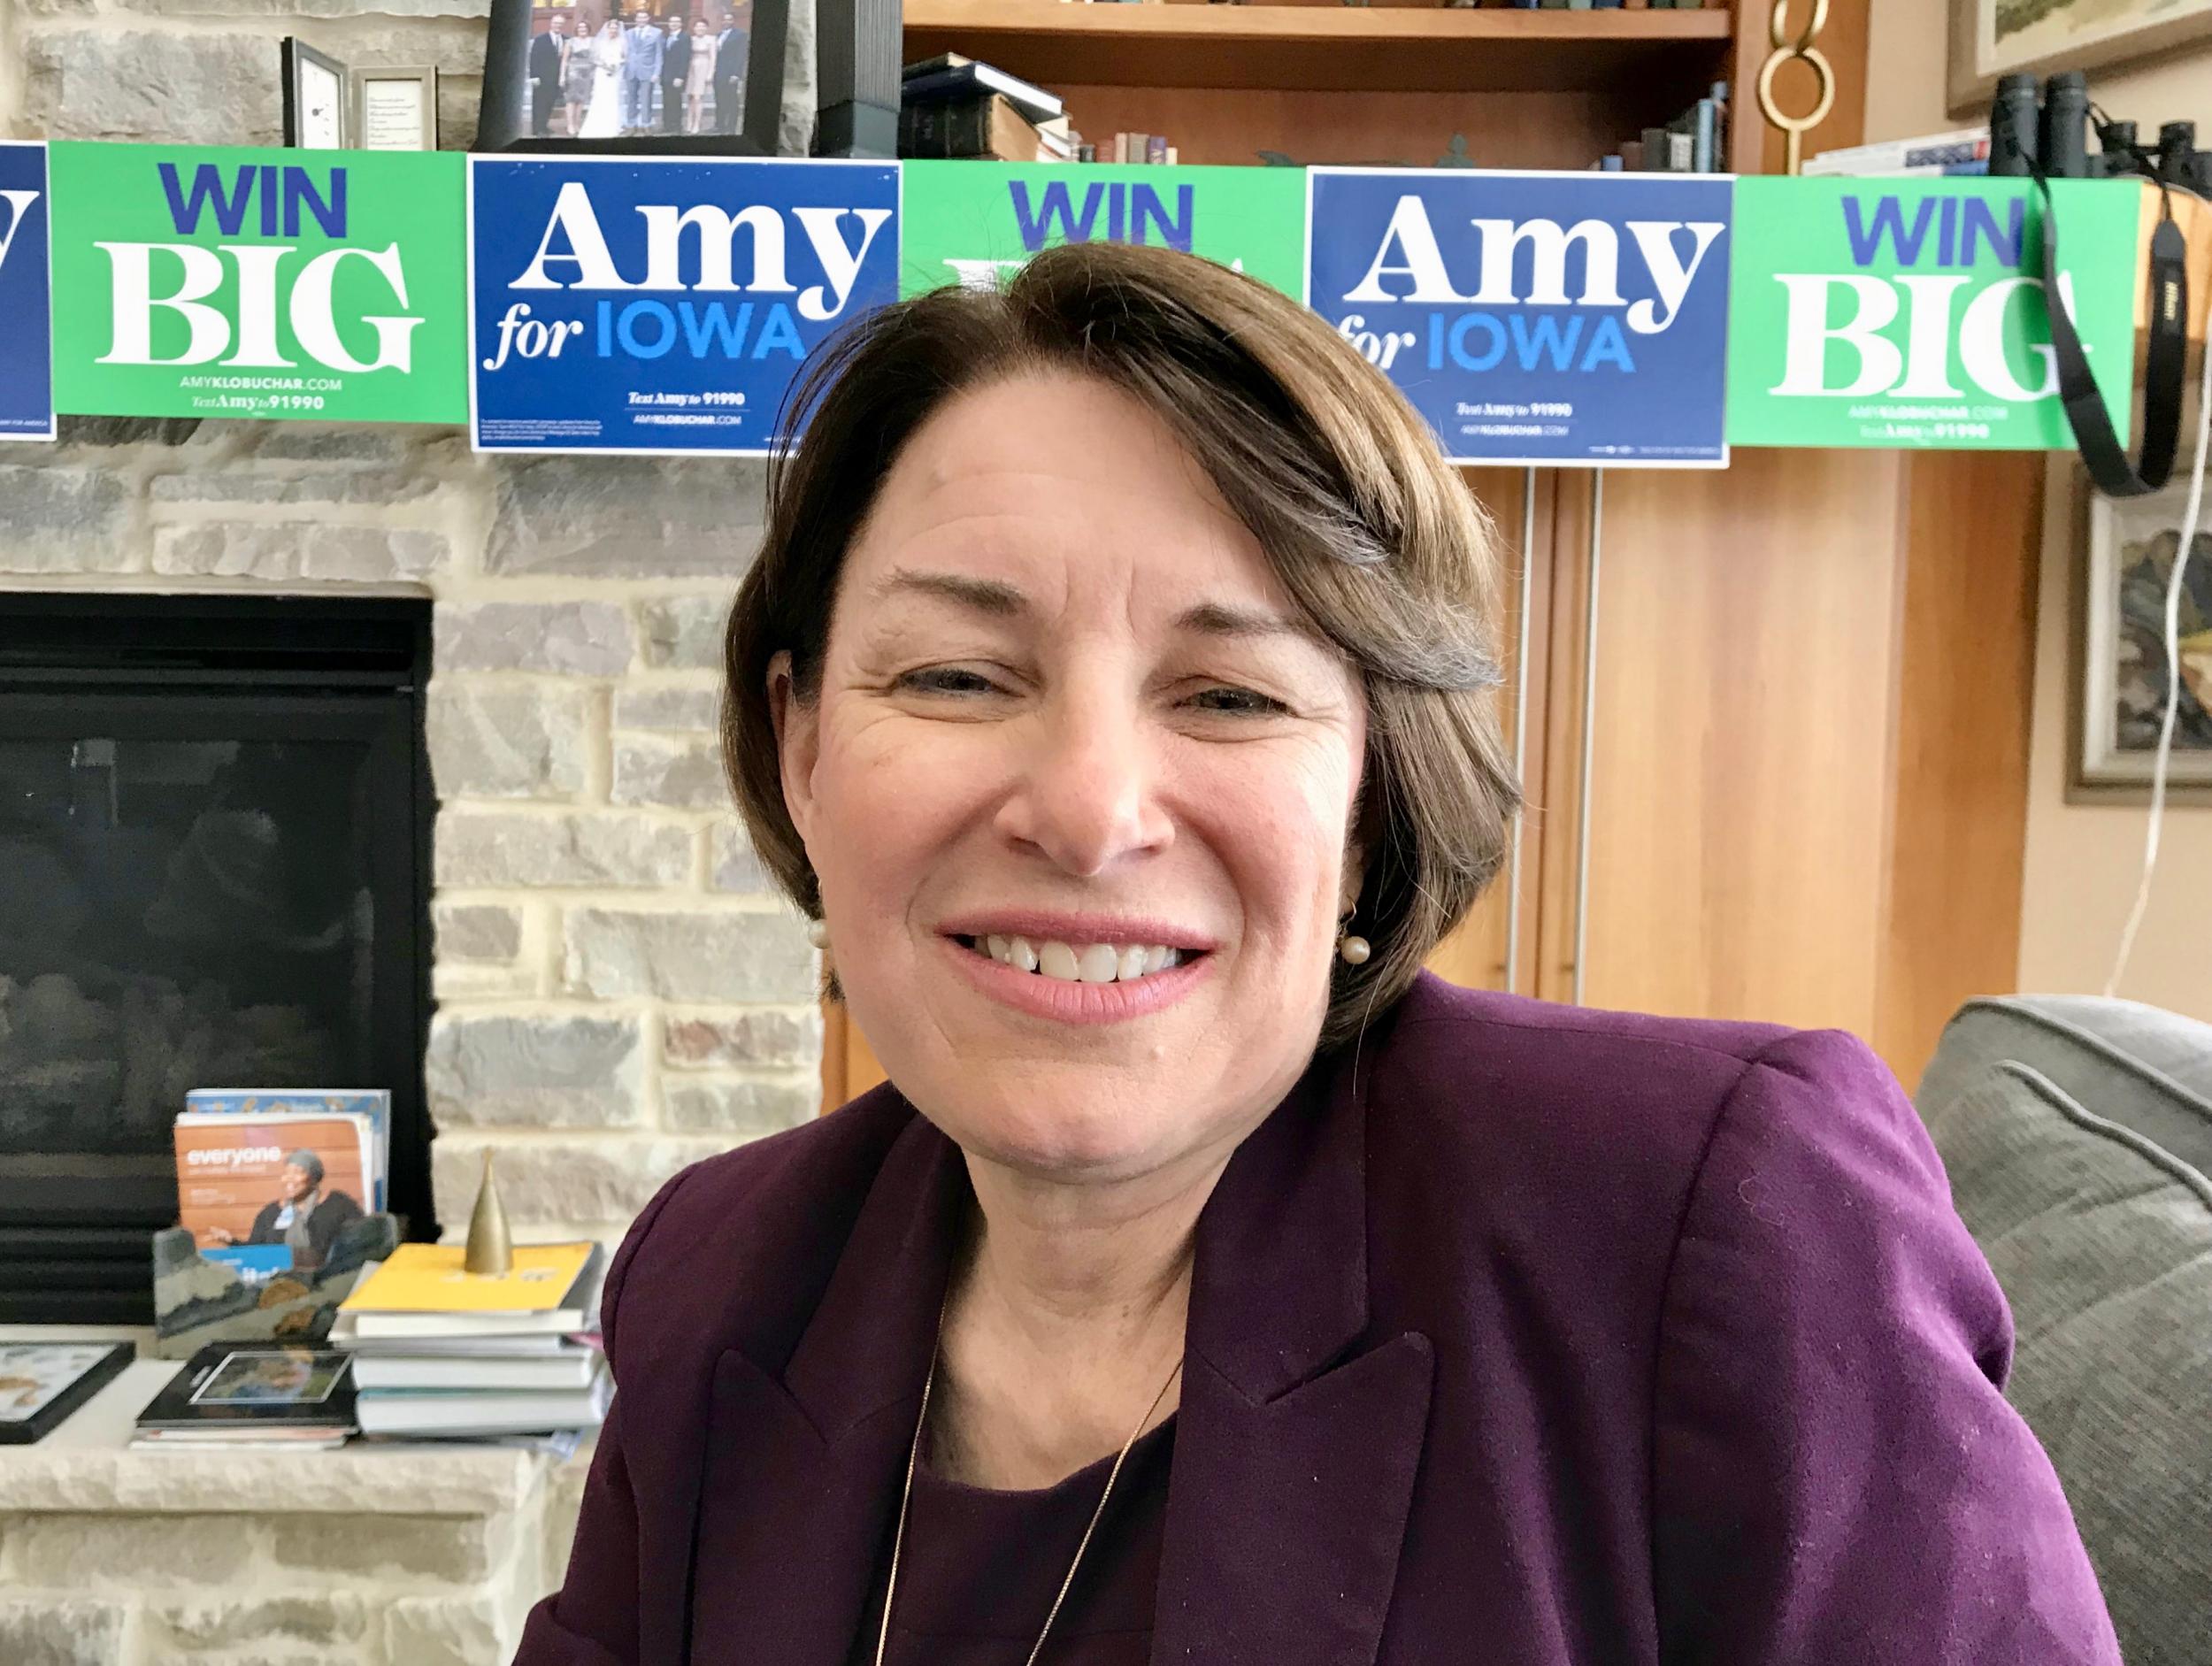 Amy Klobuchar rejects suggestion America not ready to elect a woman president